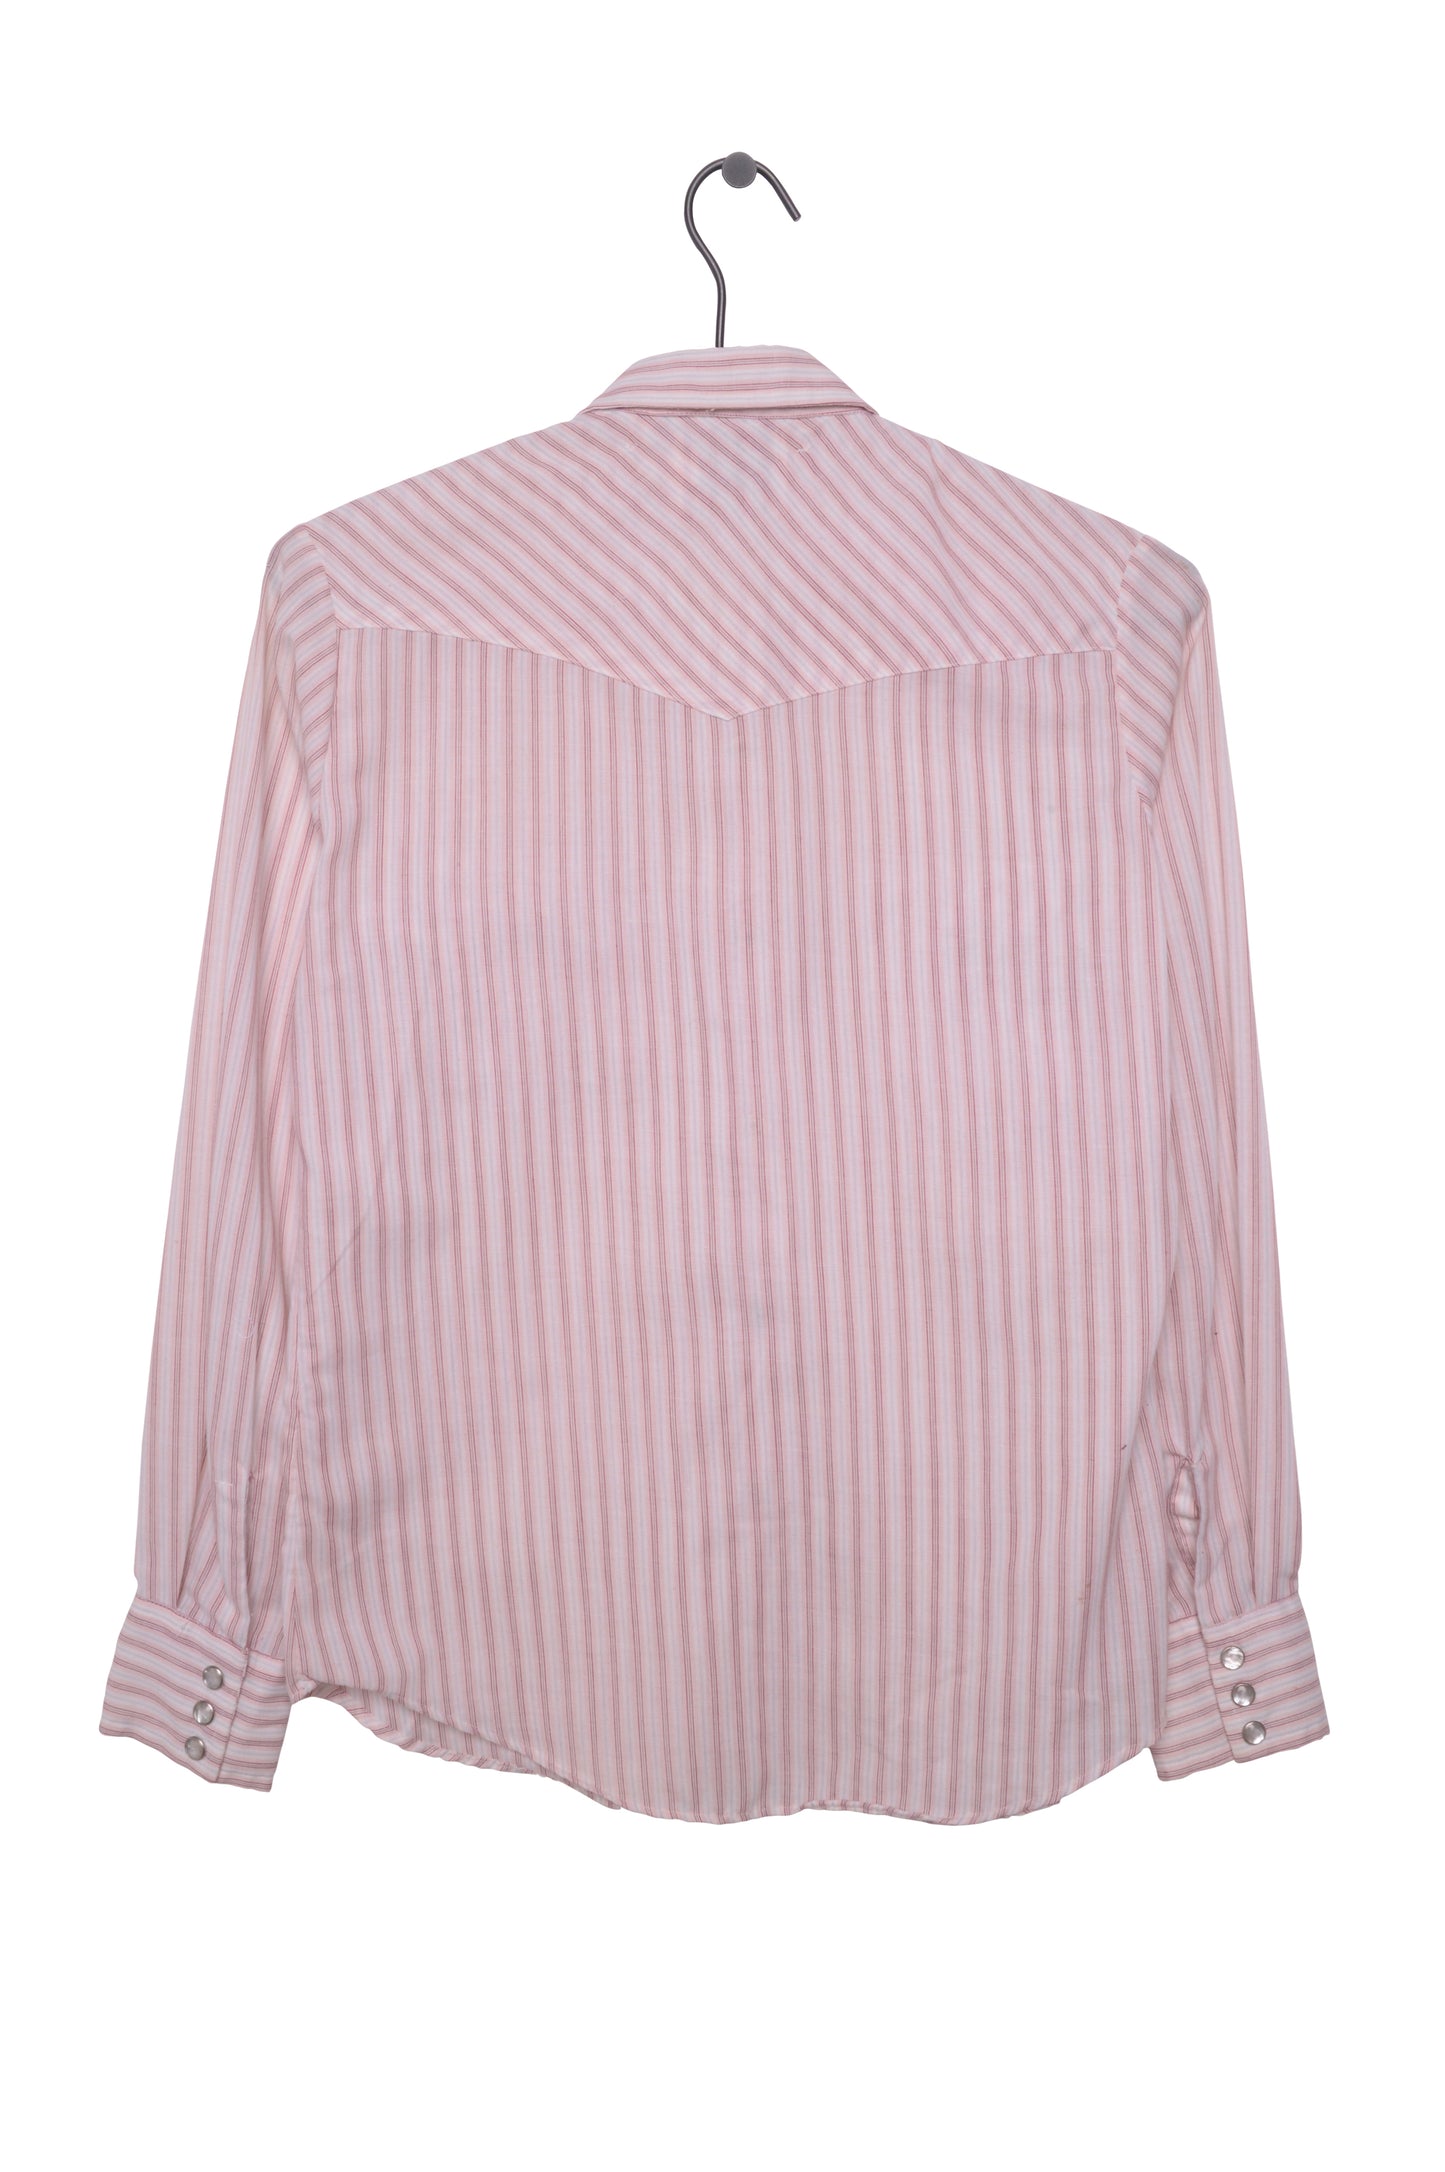 Striped Pearl Snap Top